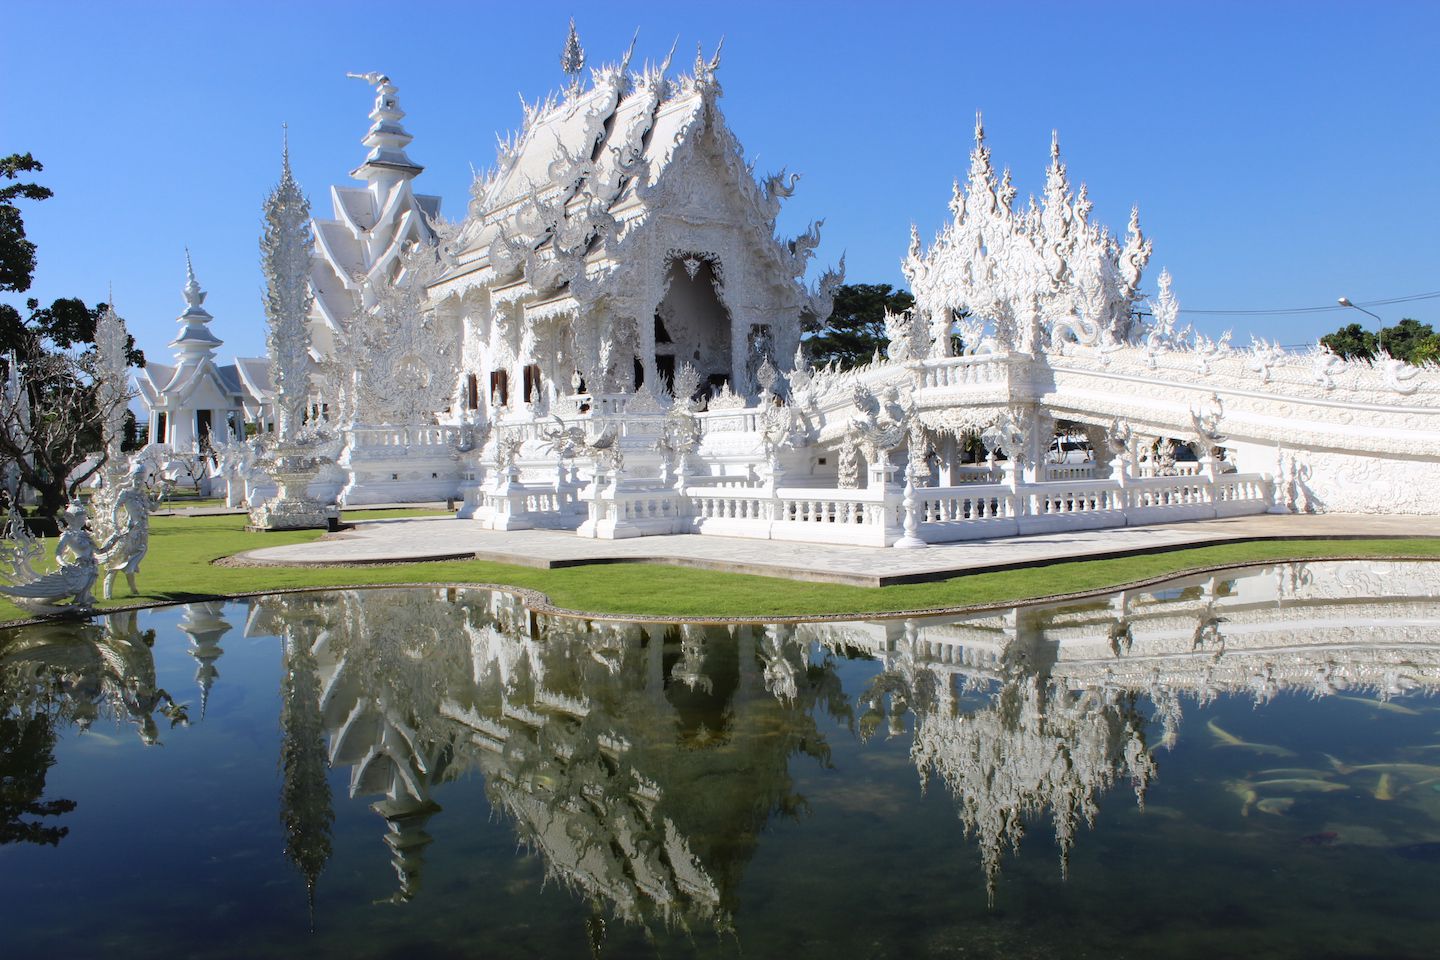 Reflections of the White Temple in Chiang Mai